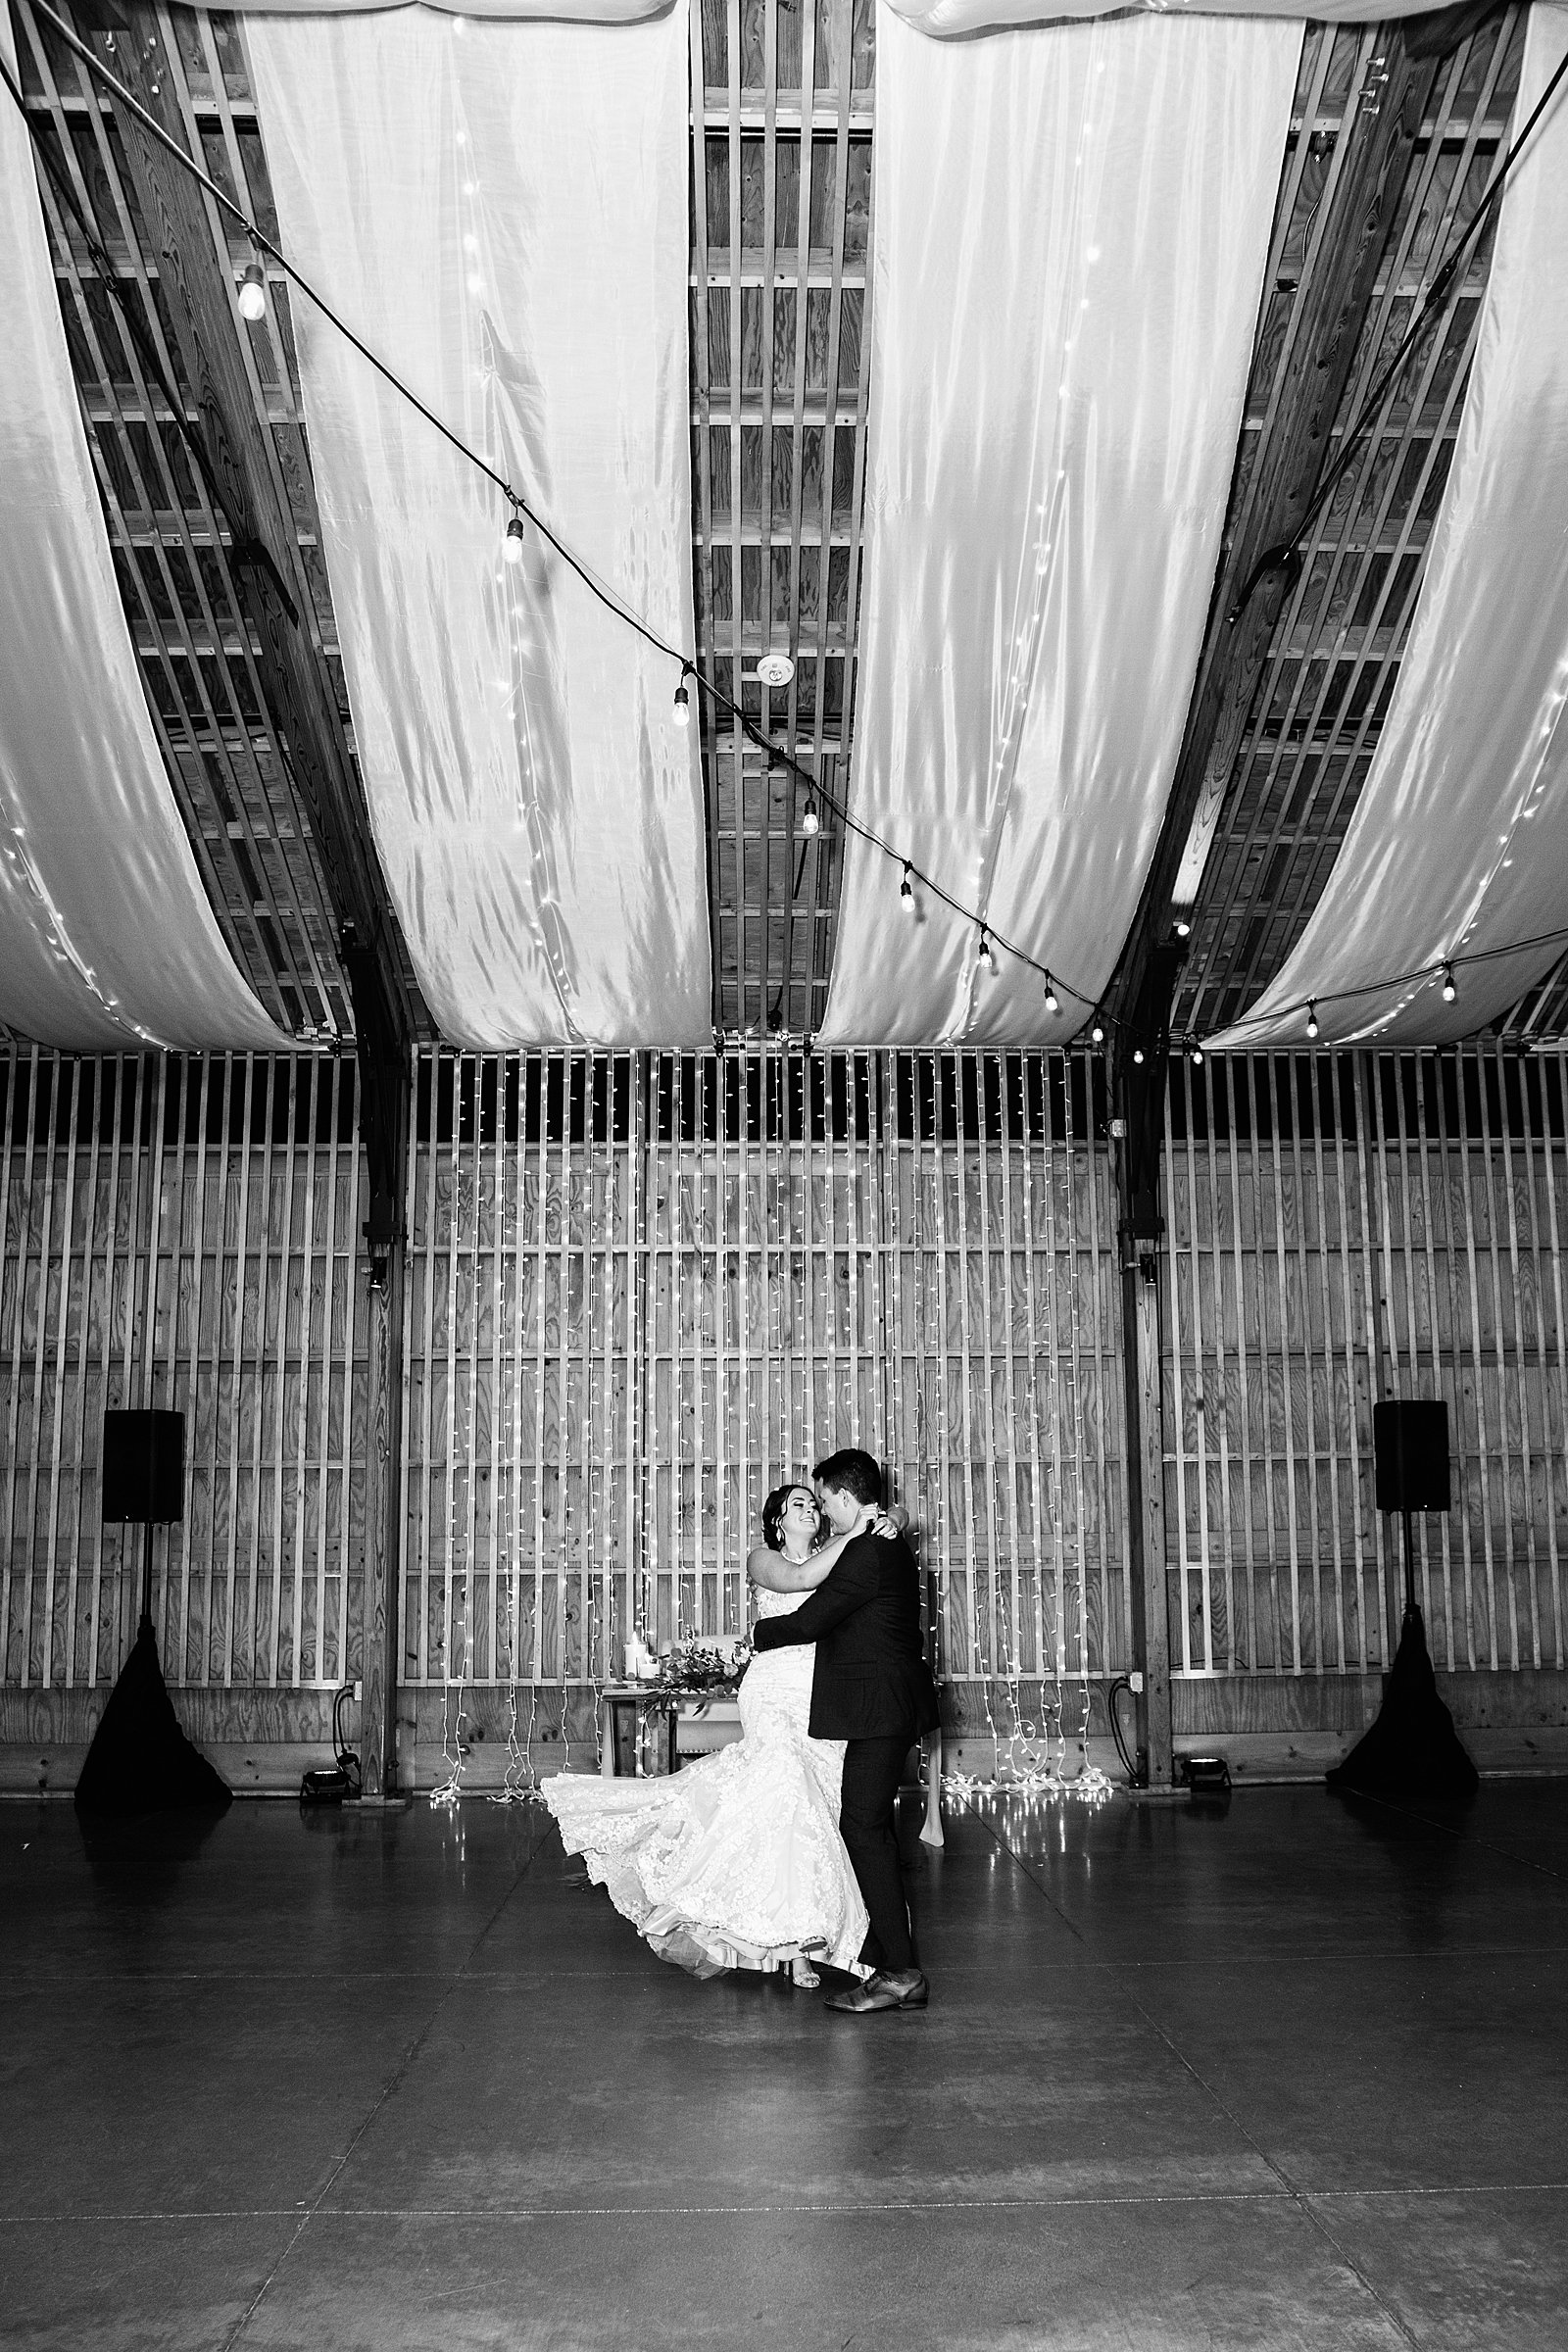 Bride and Groom sharing first dance at their The Paseo wedding reception by Arizona wedding photographer PMA Photography.